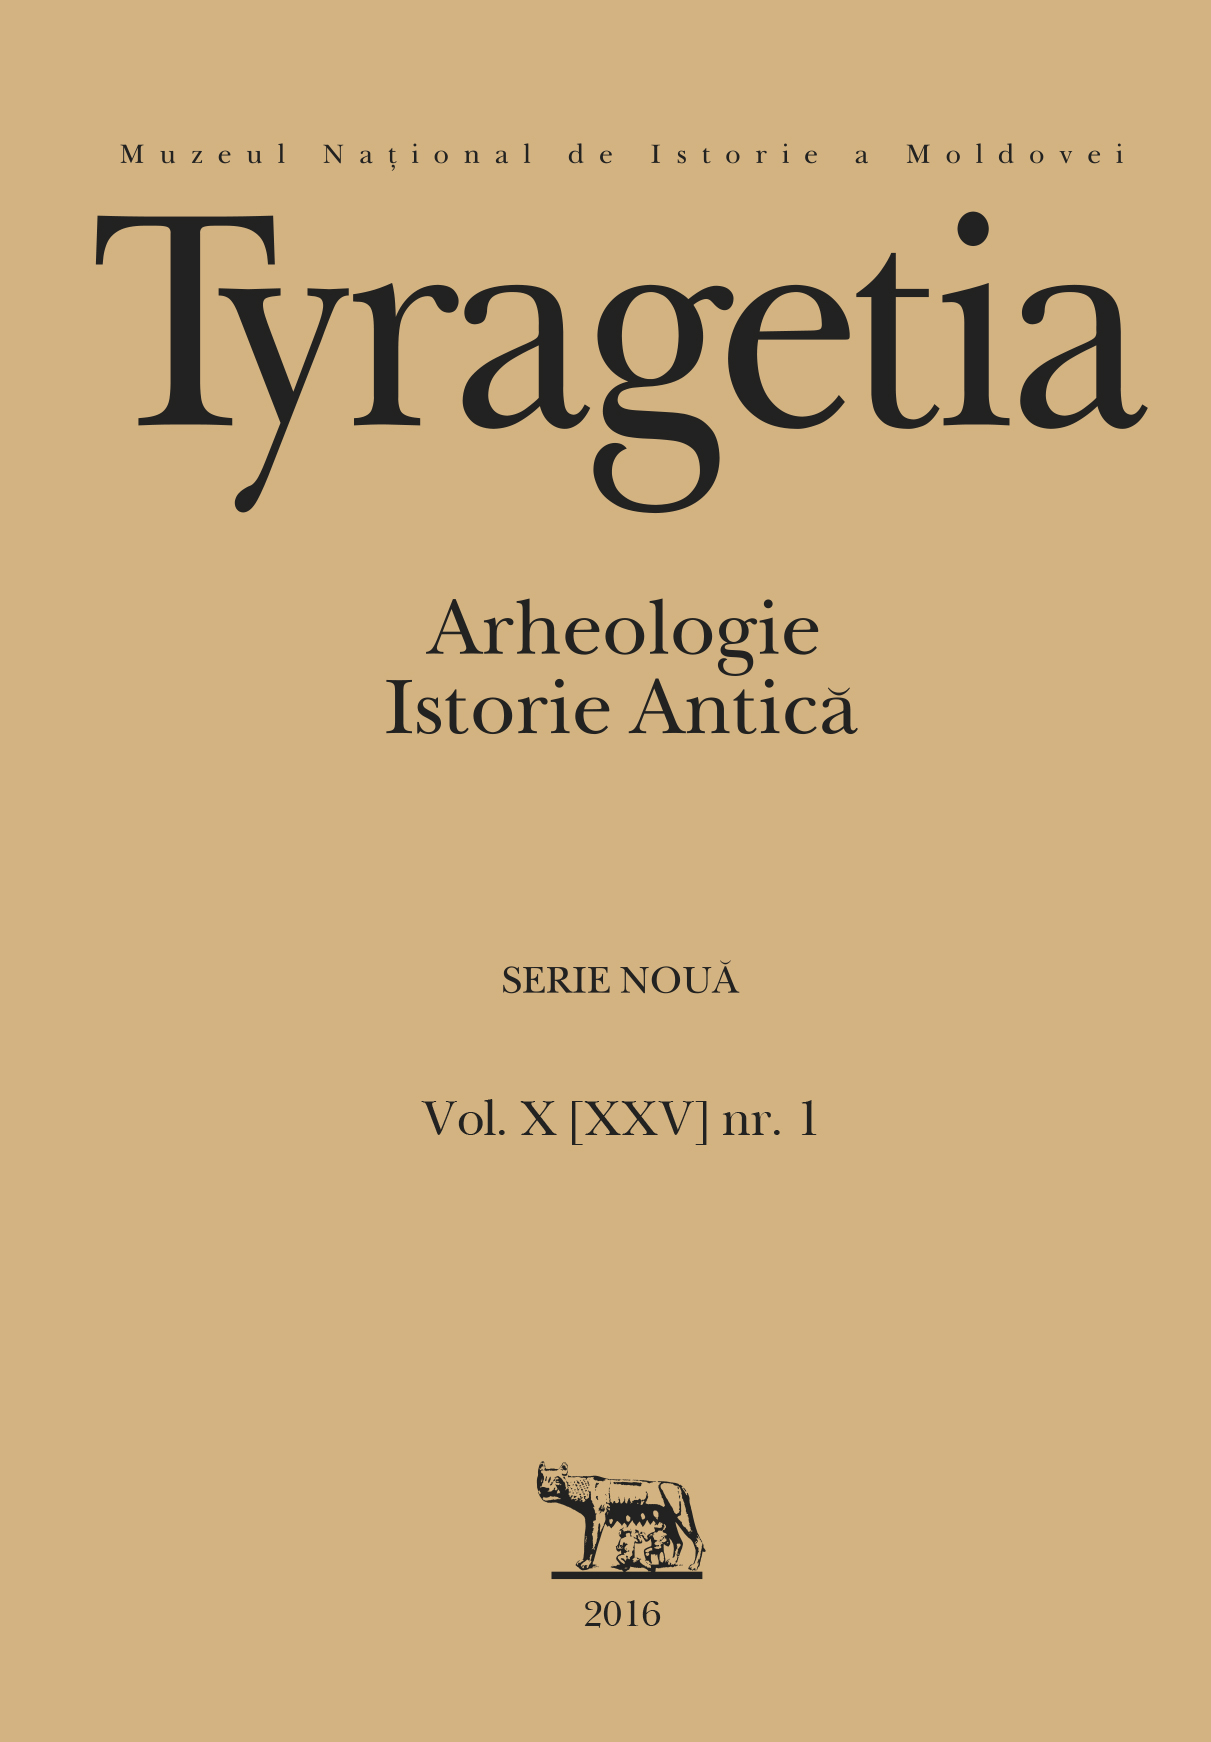 On the interpretation of lithic industry of Pre-Cucuteni - Trypillia A Cover Image